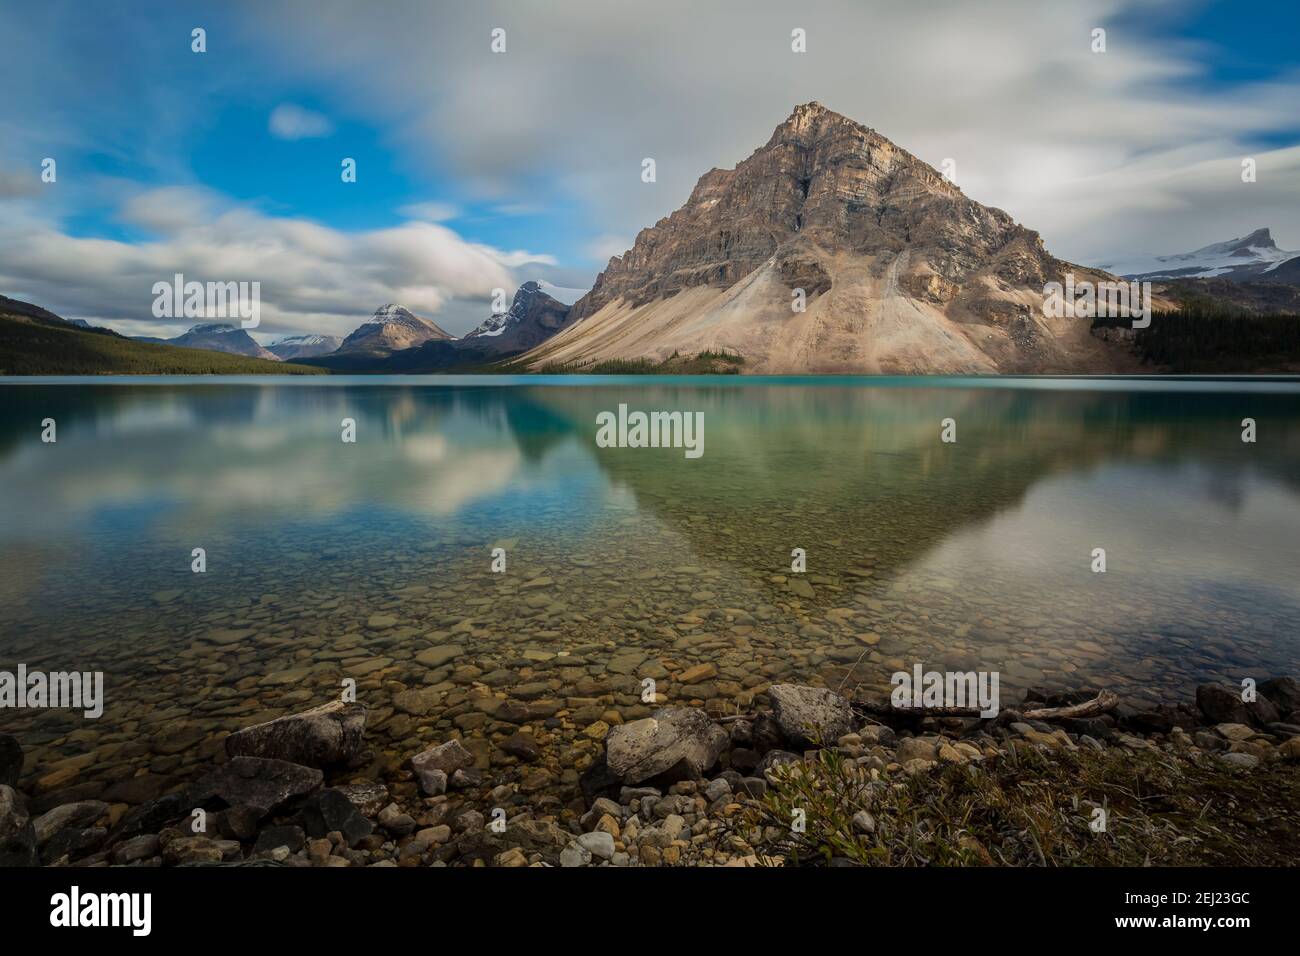 Rocky mountain reflected on clear smooth lake water with green and blue tones and rocks on a summer day with a blue sky and clouds, Alberta, Canada Stock Photo